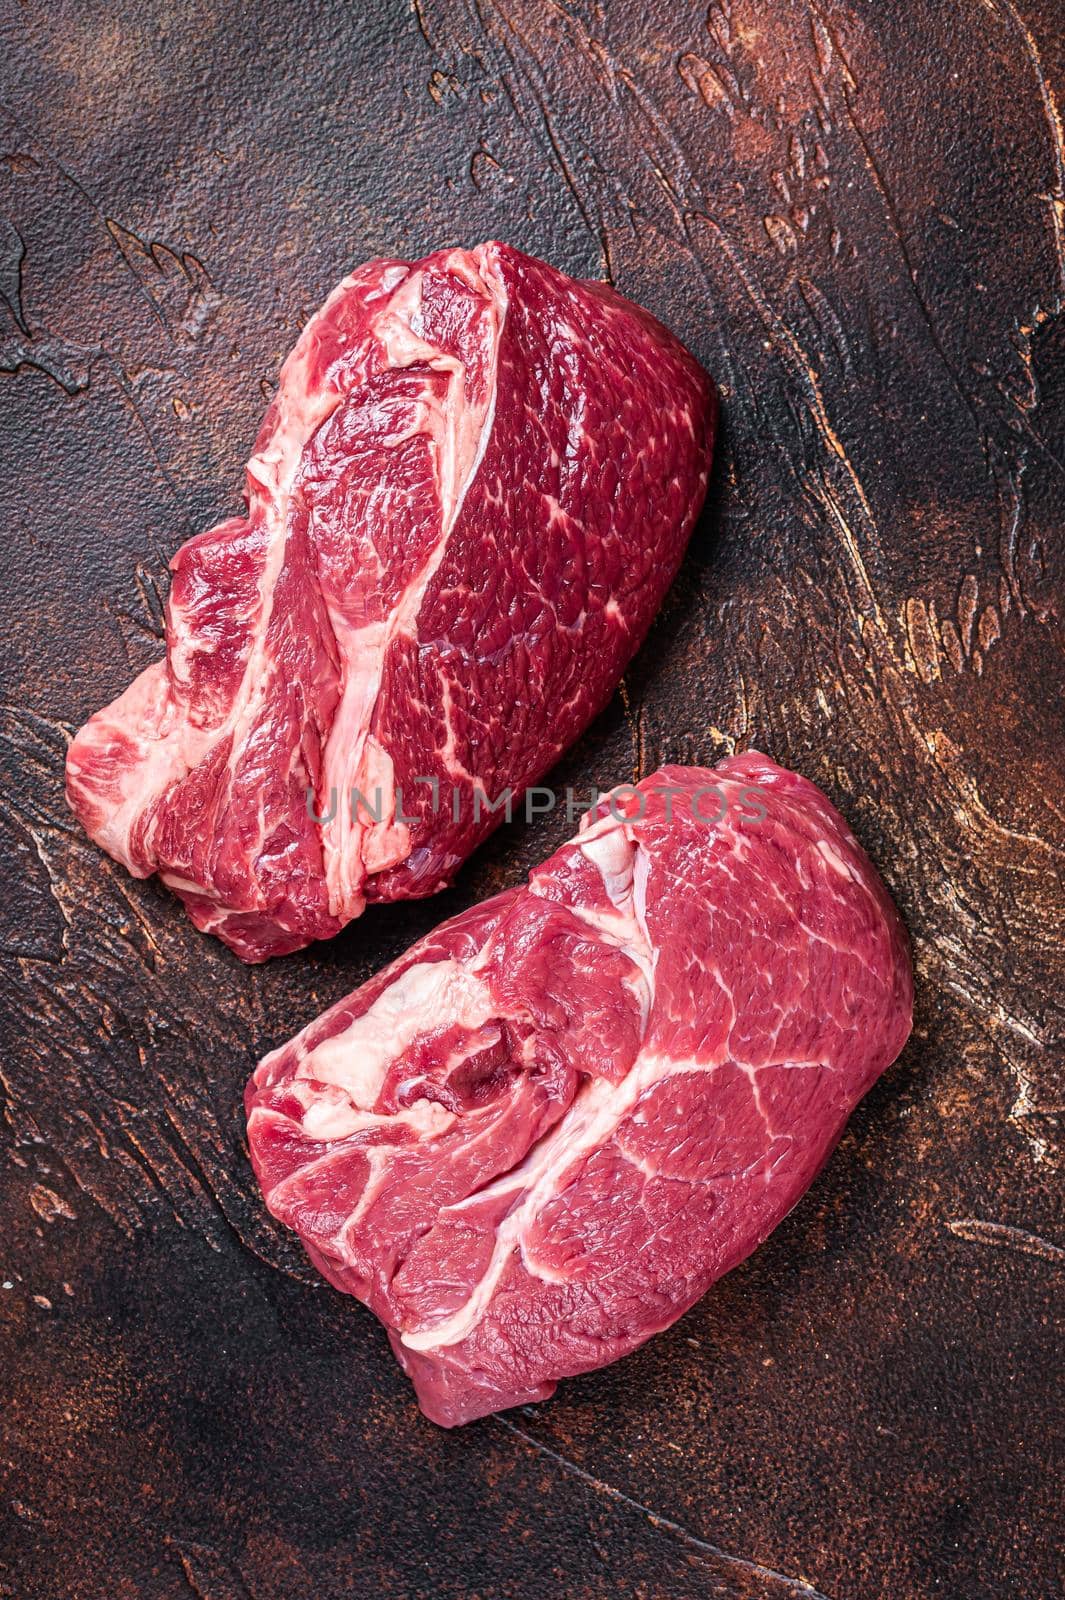 Raw Chuck eye roll beef steak on butcher table. Dark background. Top view by Composter